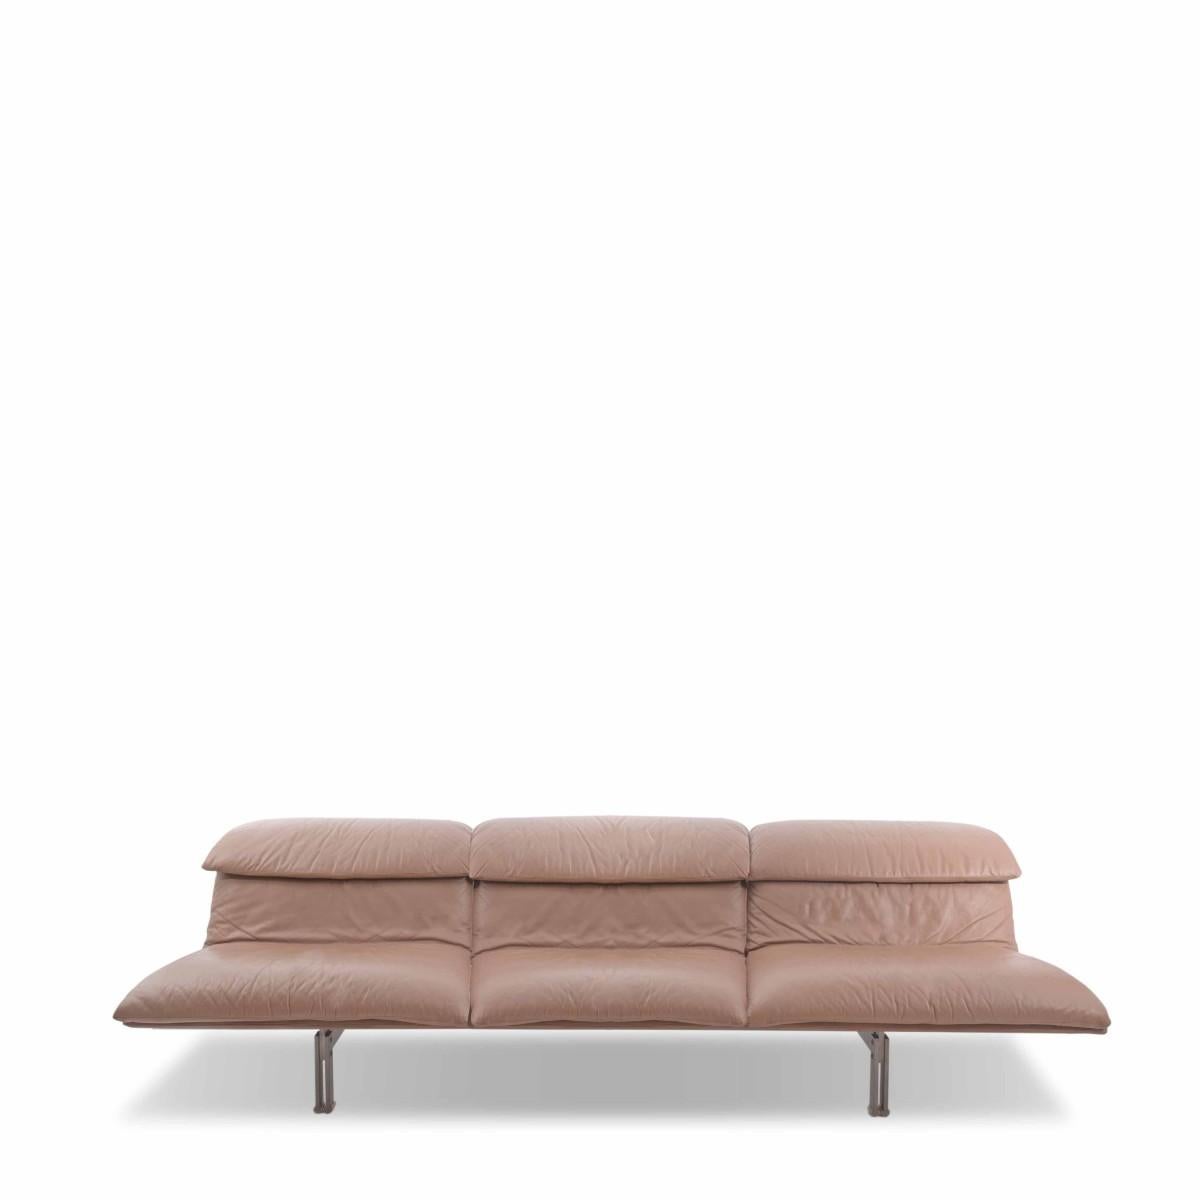 Saporiti 'Wave'' sofa by Giovanni Offredi with tan leather upholstery, circa late 1970s, maybe early 1980s.
Measures: Seat height-16.5